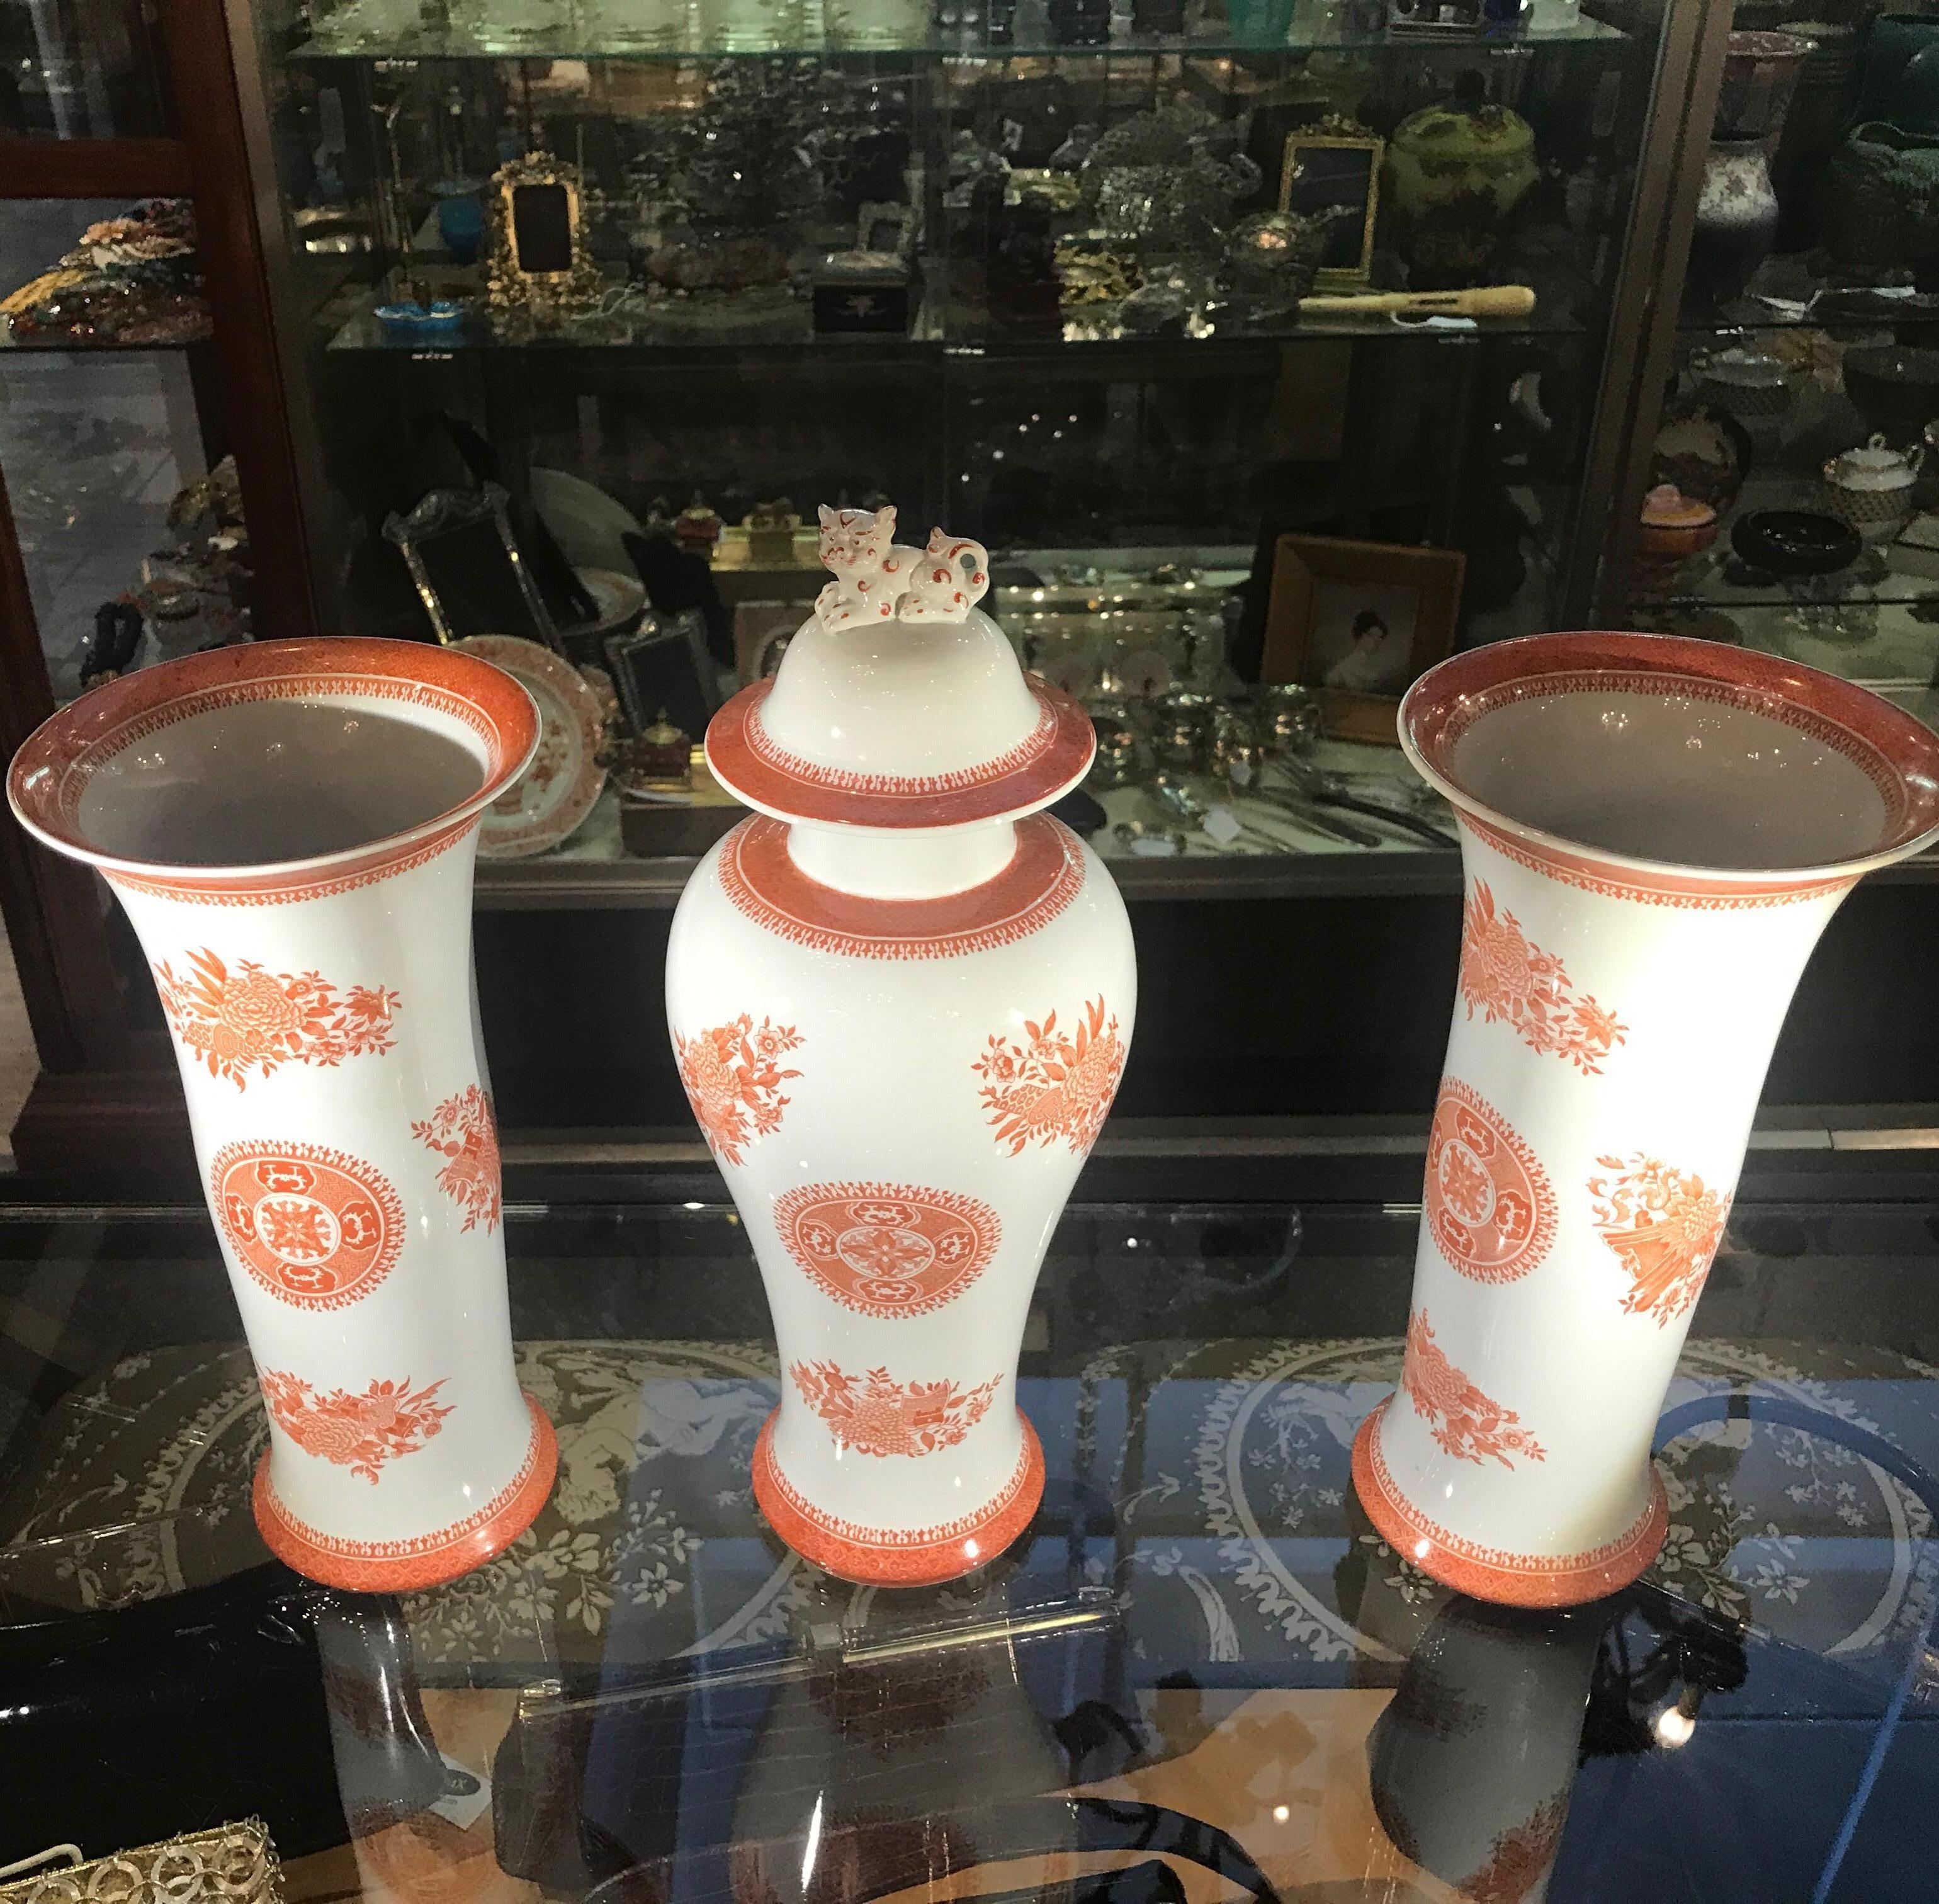 Elegant and Classic English made three-piece garniture set in orange and white. Two beaker vases with center temple jar. The white background with a Classic Chinese Fitzhugh pattern from the late 19th century.
The Fitzhugh china pattern originates